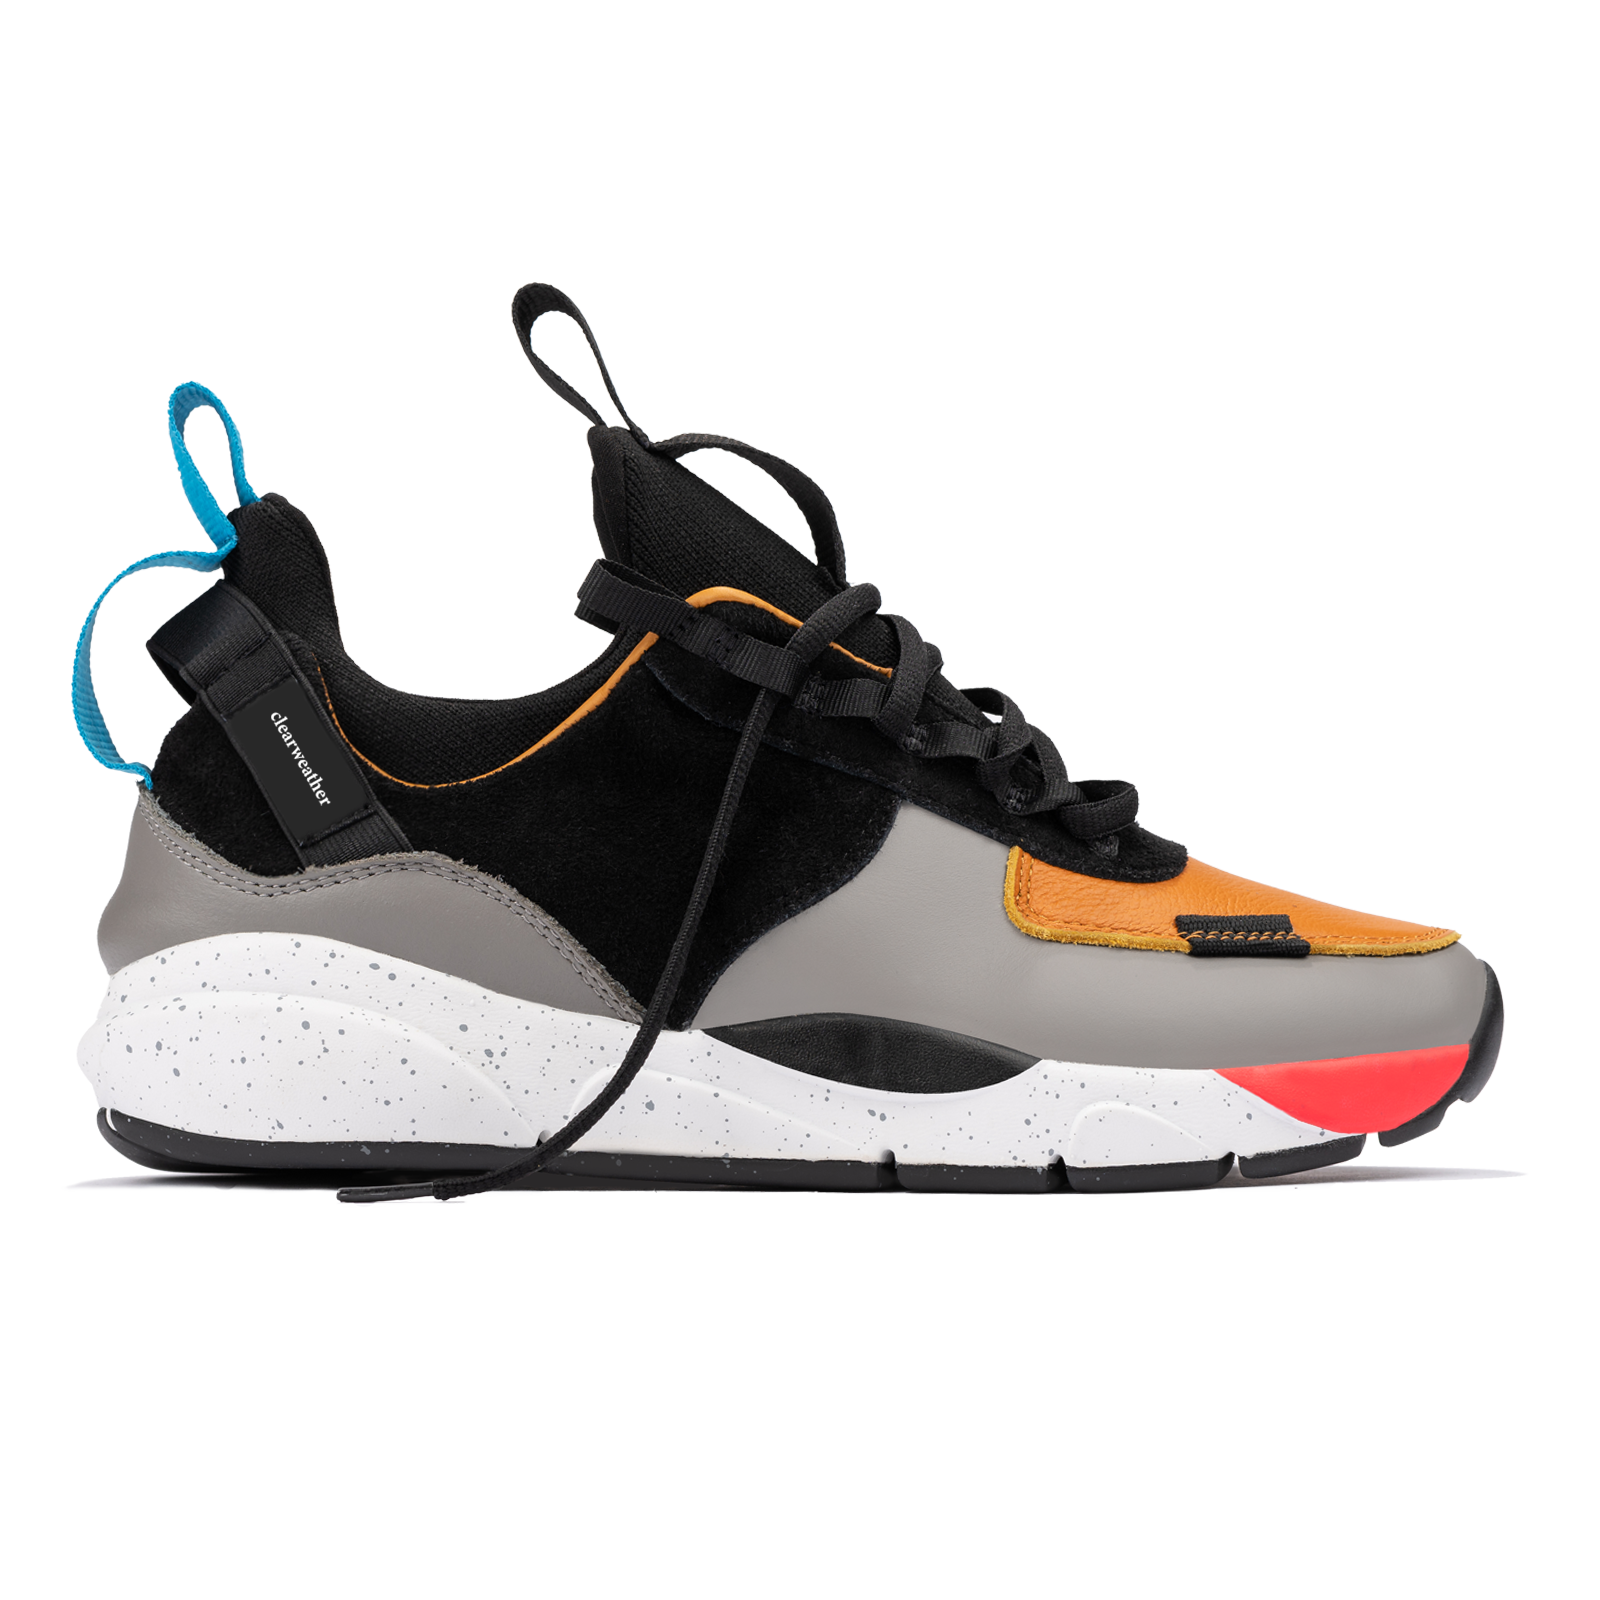 Profile shot, The Contera Kalahari is a Runner with grey leather black suede and tabaco orange leather, Blue webbing heel pull, Black webbin tongue pull, Black webbing lace system, painted eva midsole ande black rubber outsole. 